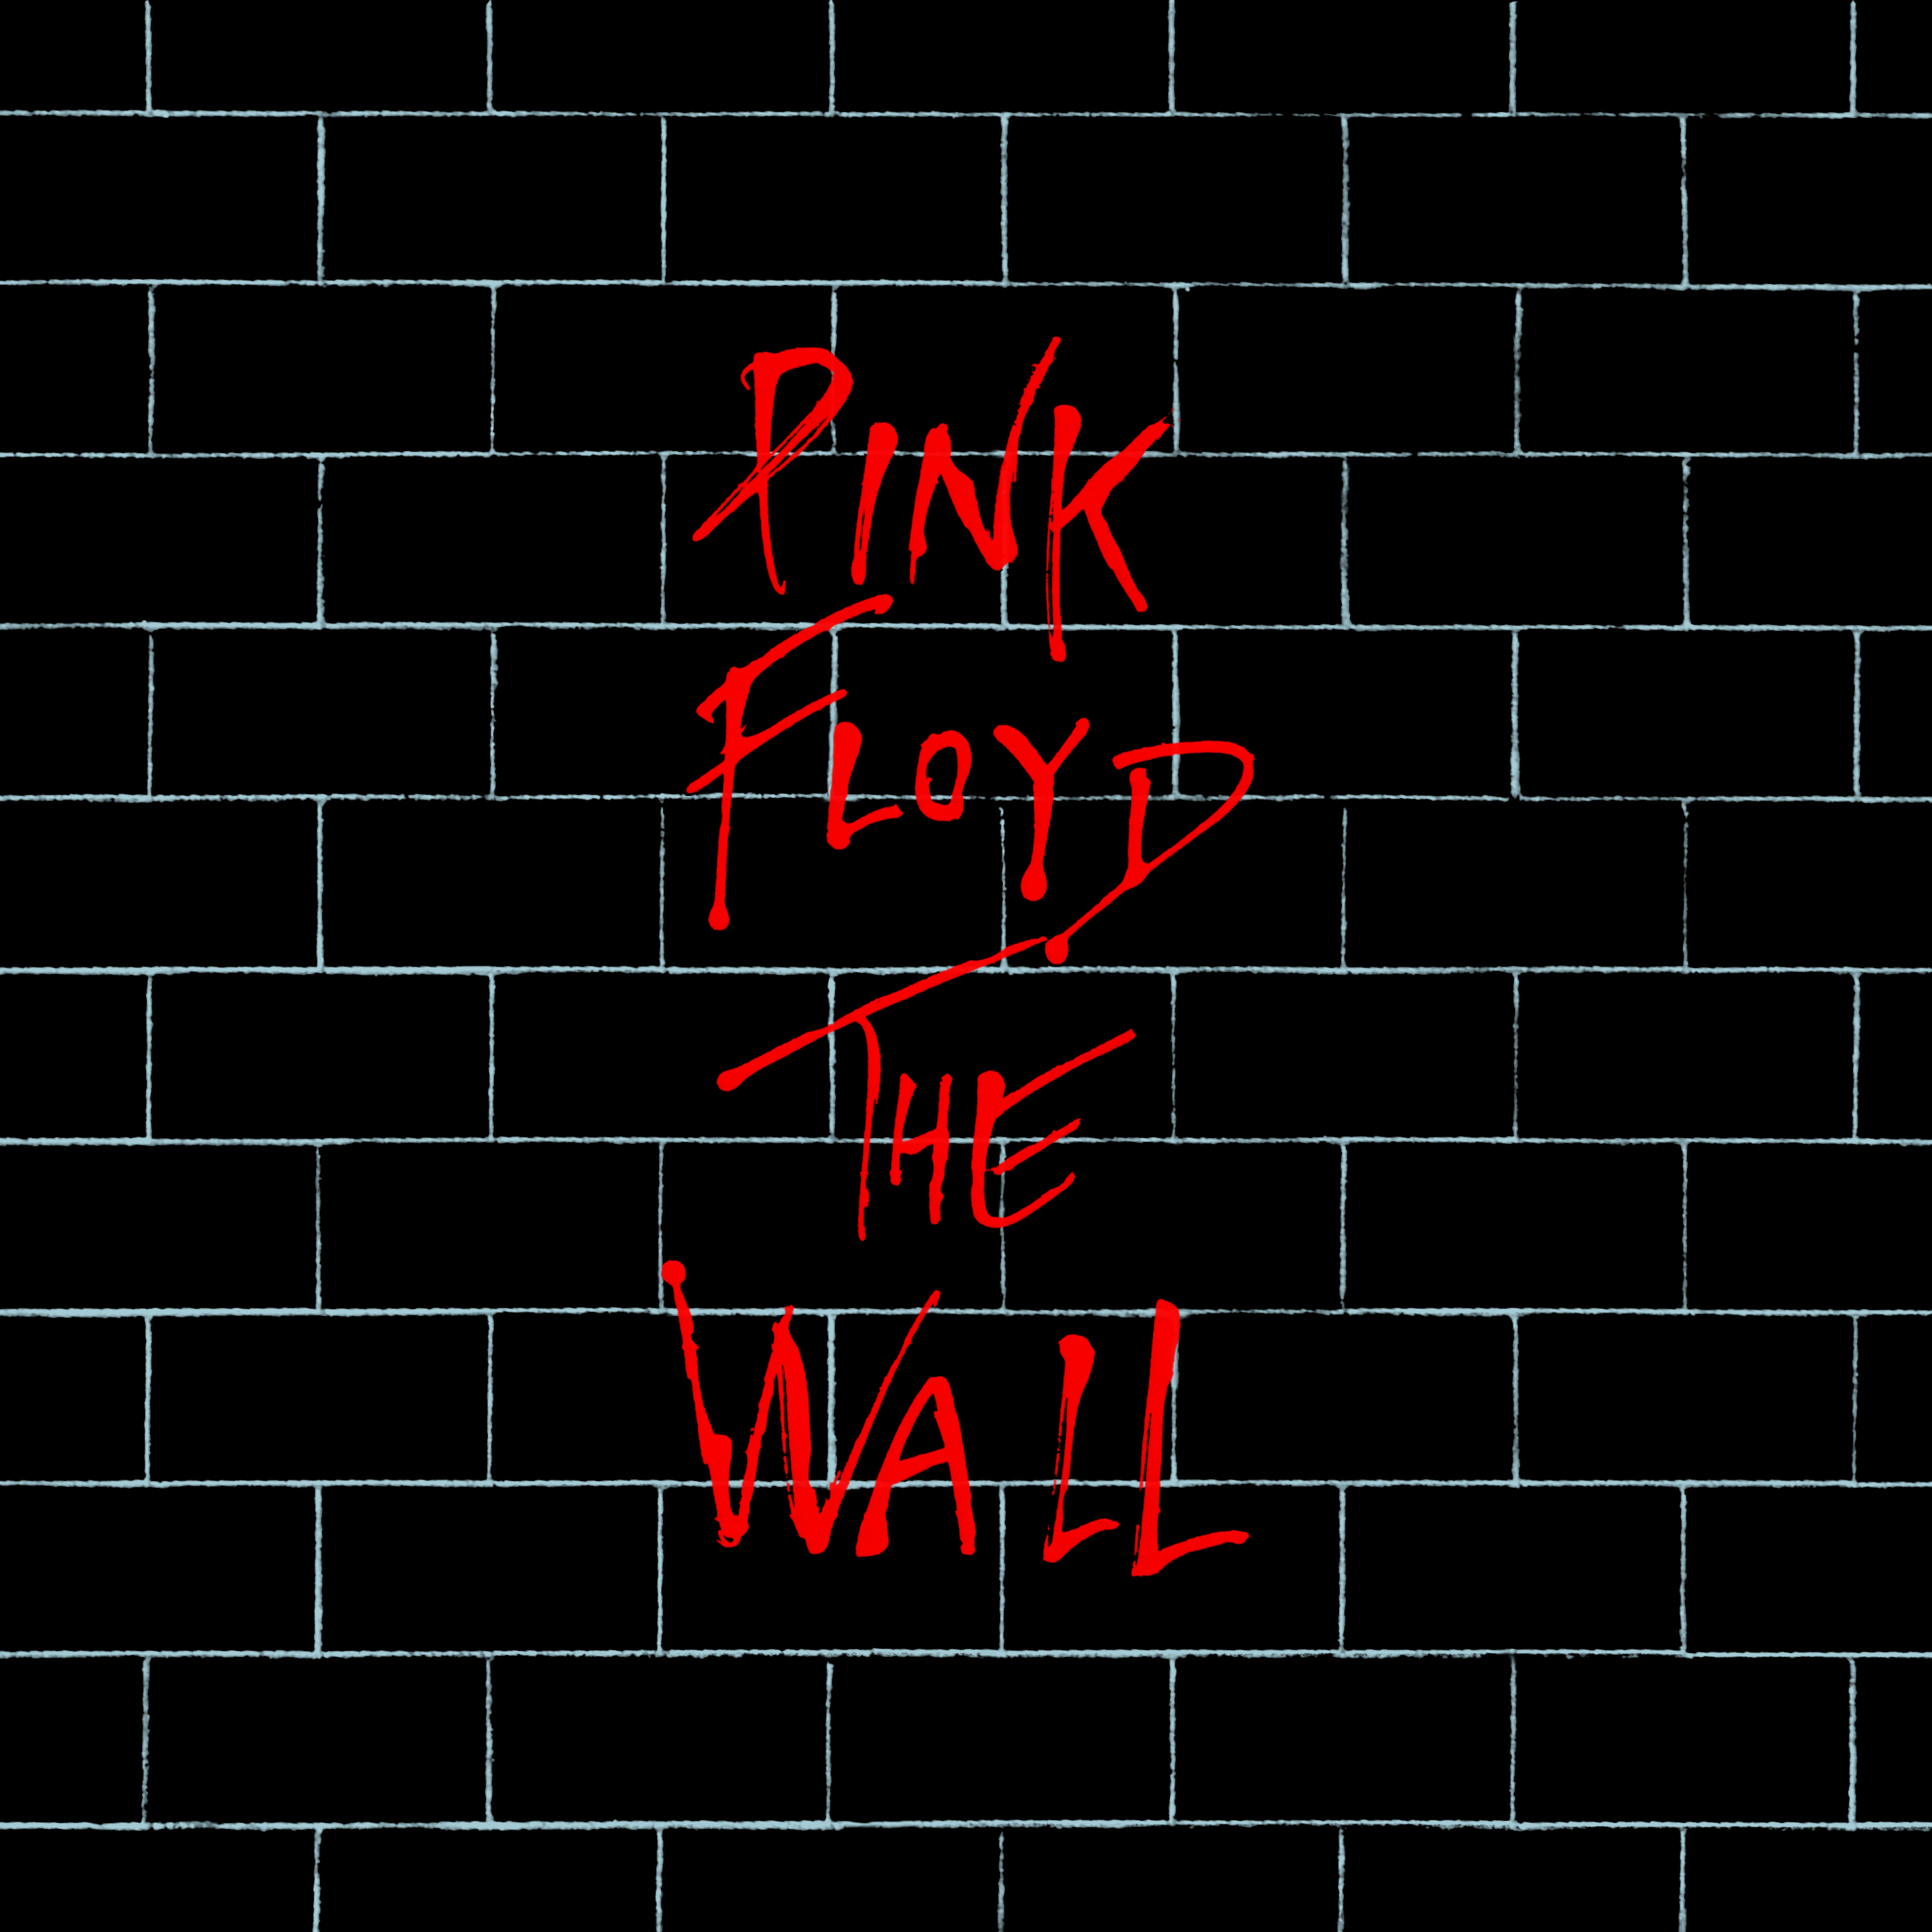 AlbumArtExchange.com • View topic - The Wall - Red Text/Black Brick ...